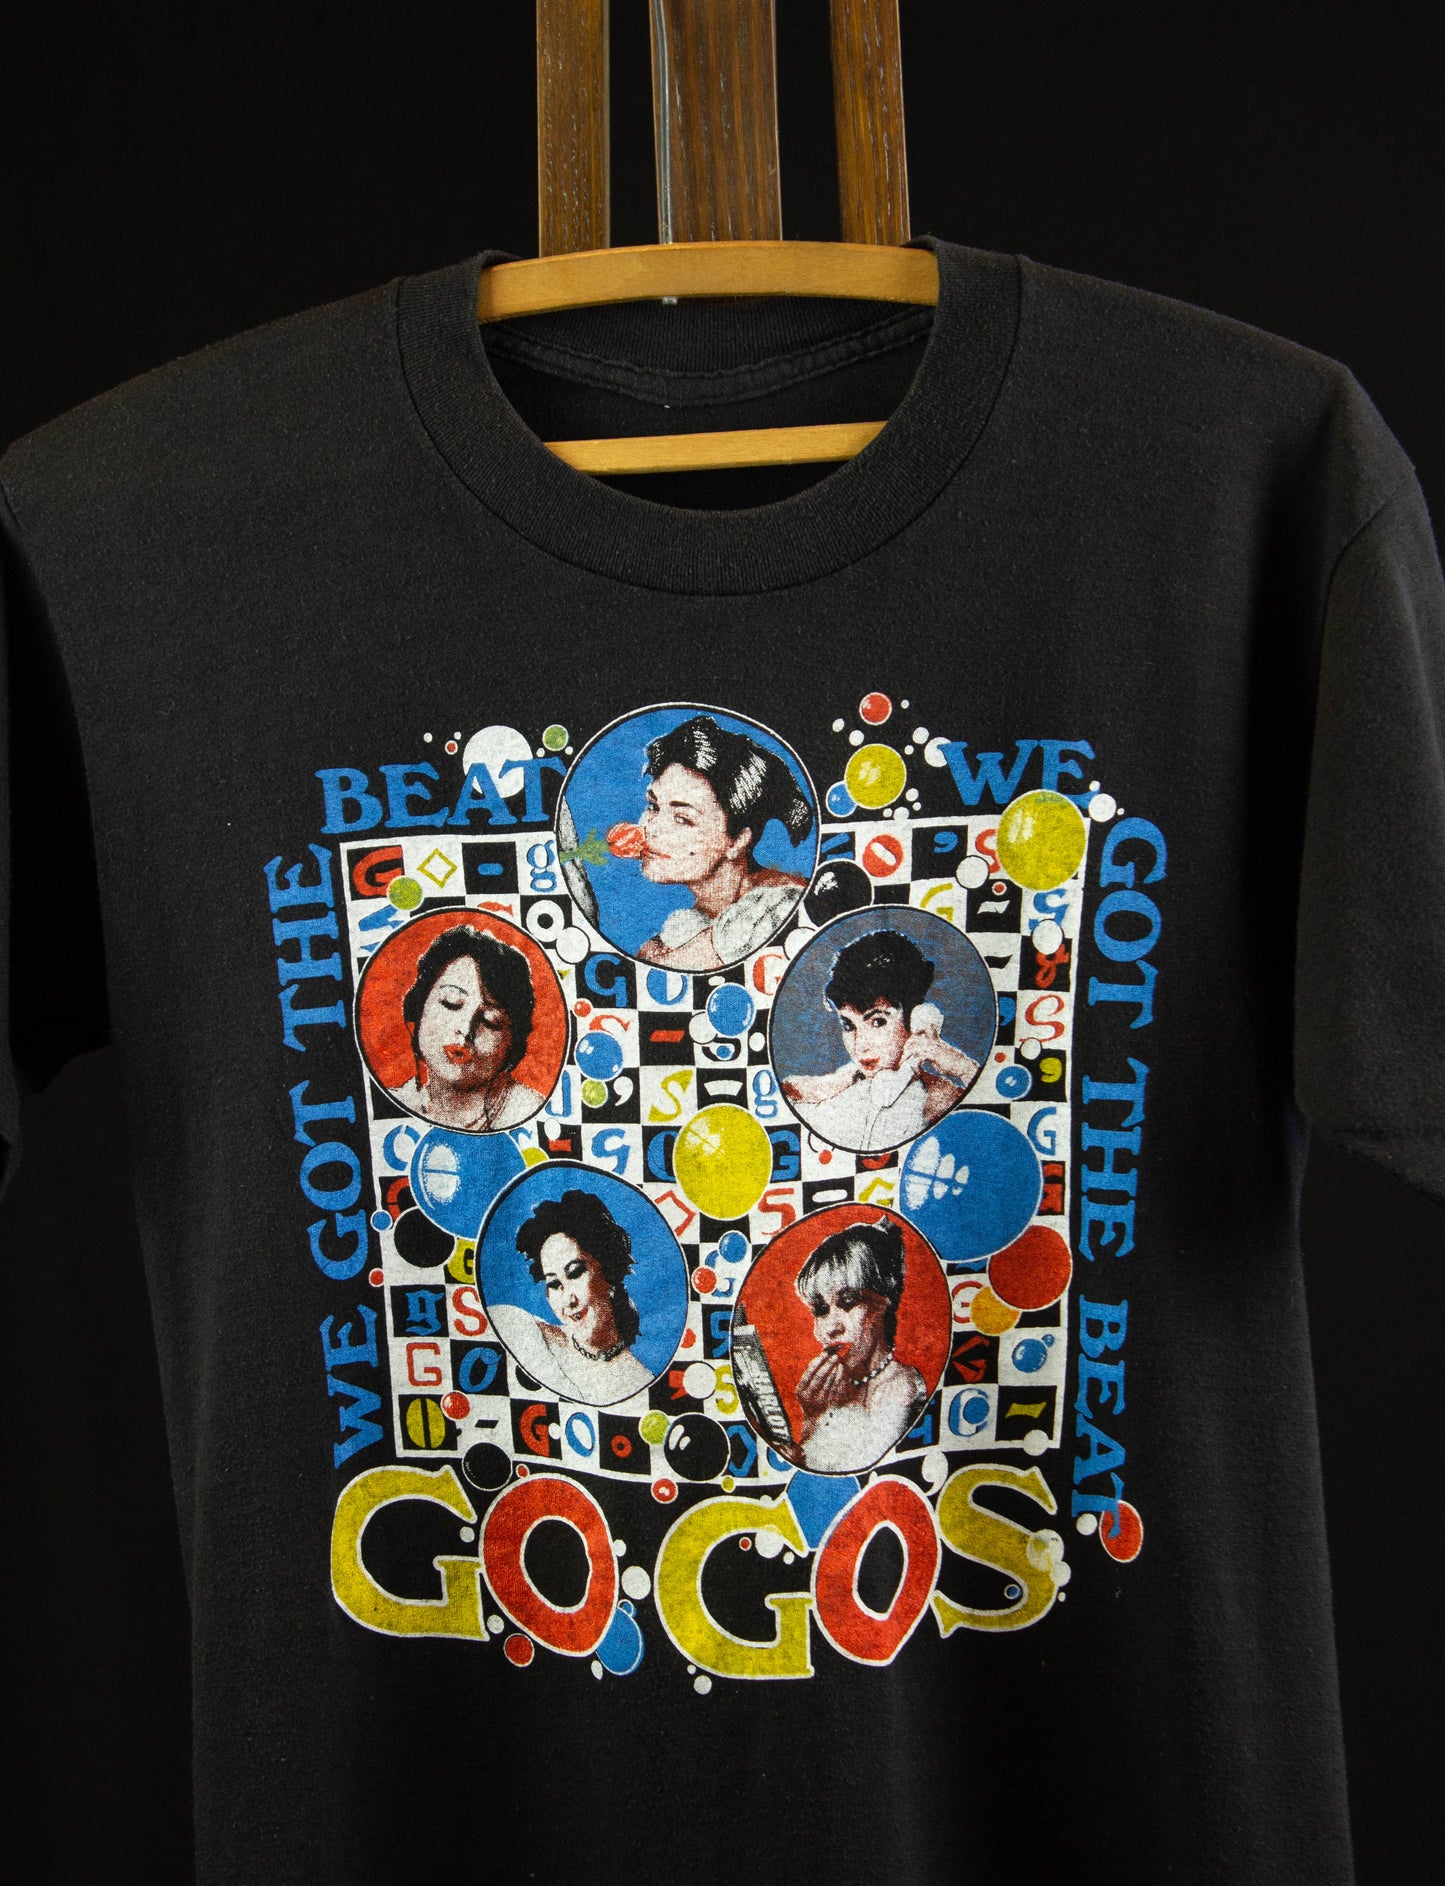 Vintage The Go-Go's Concert T Shirt 80s We Got The Beat Black Parking Lot Bootleg Small